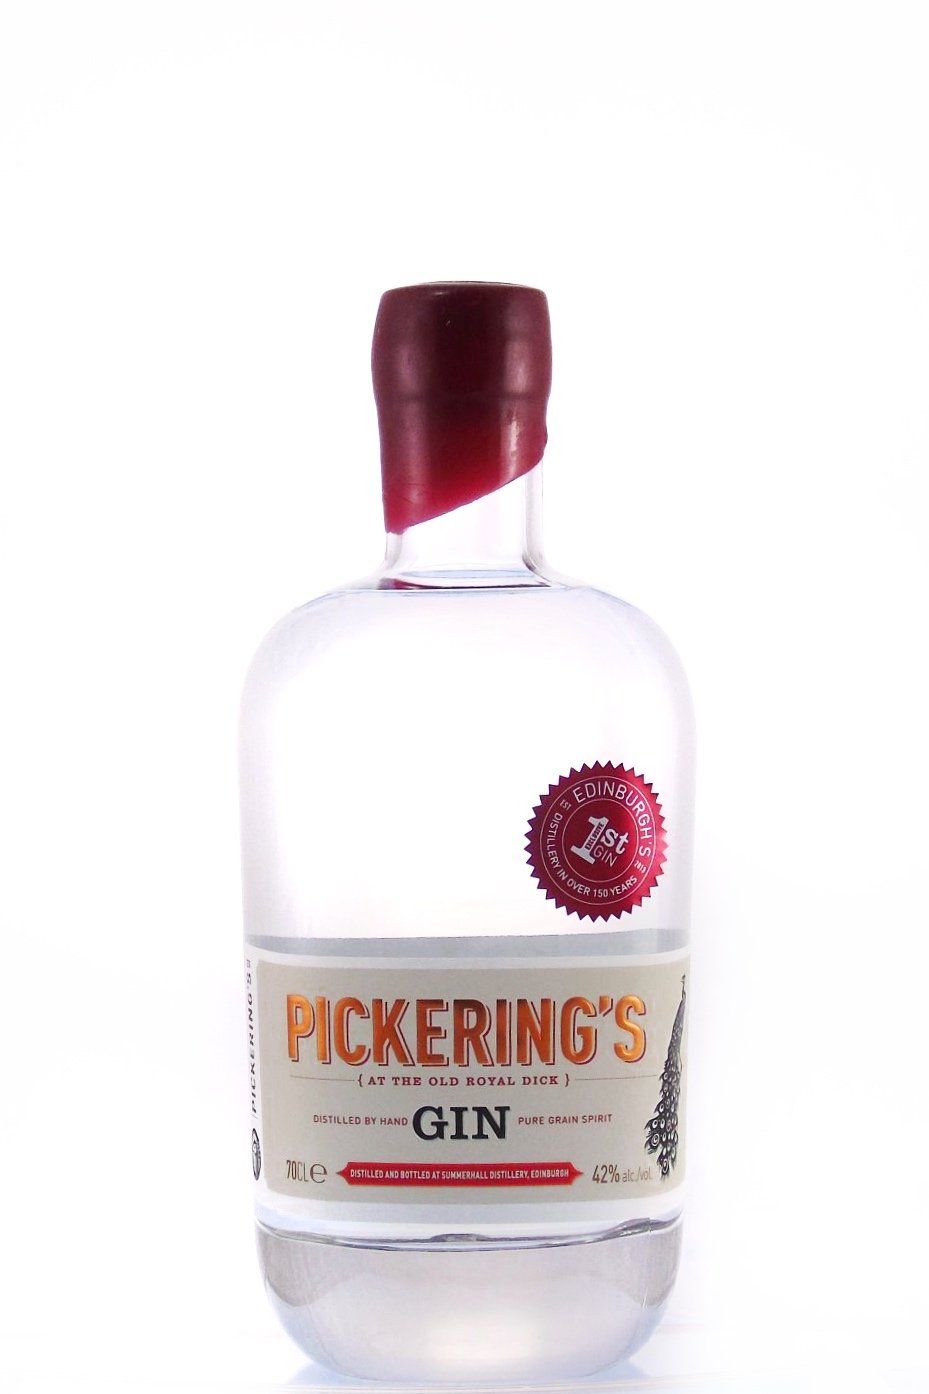 Pickerings Gin Gins & Gin Liqueurs